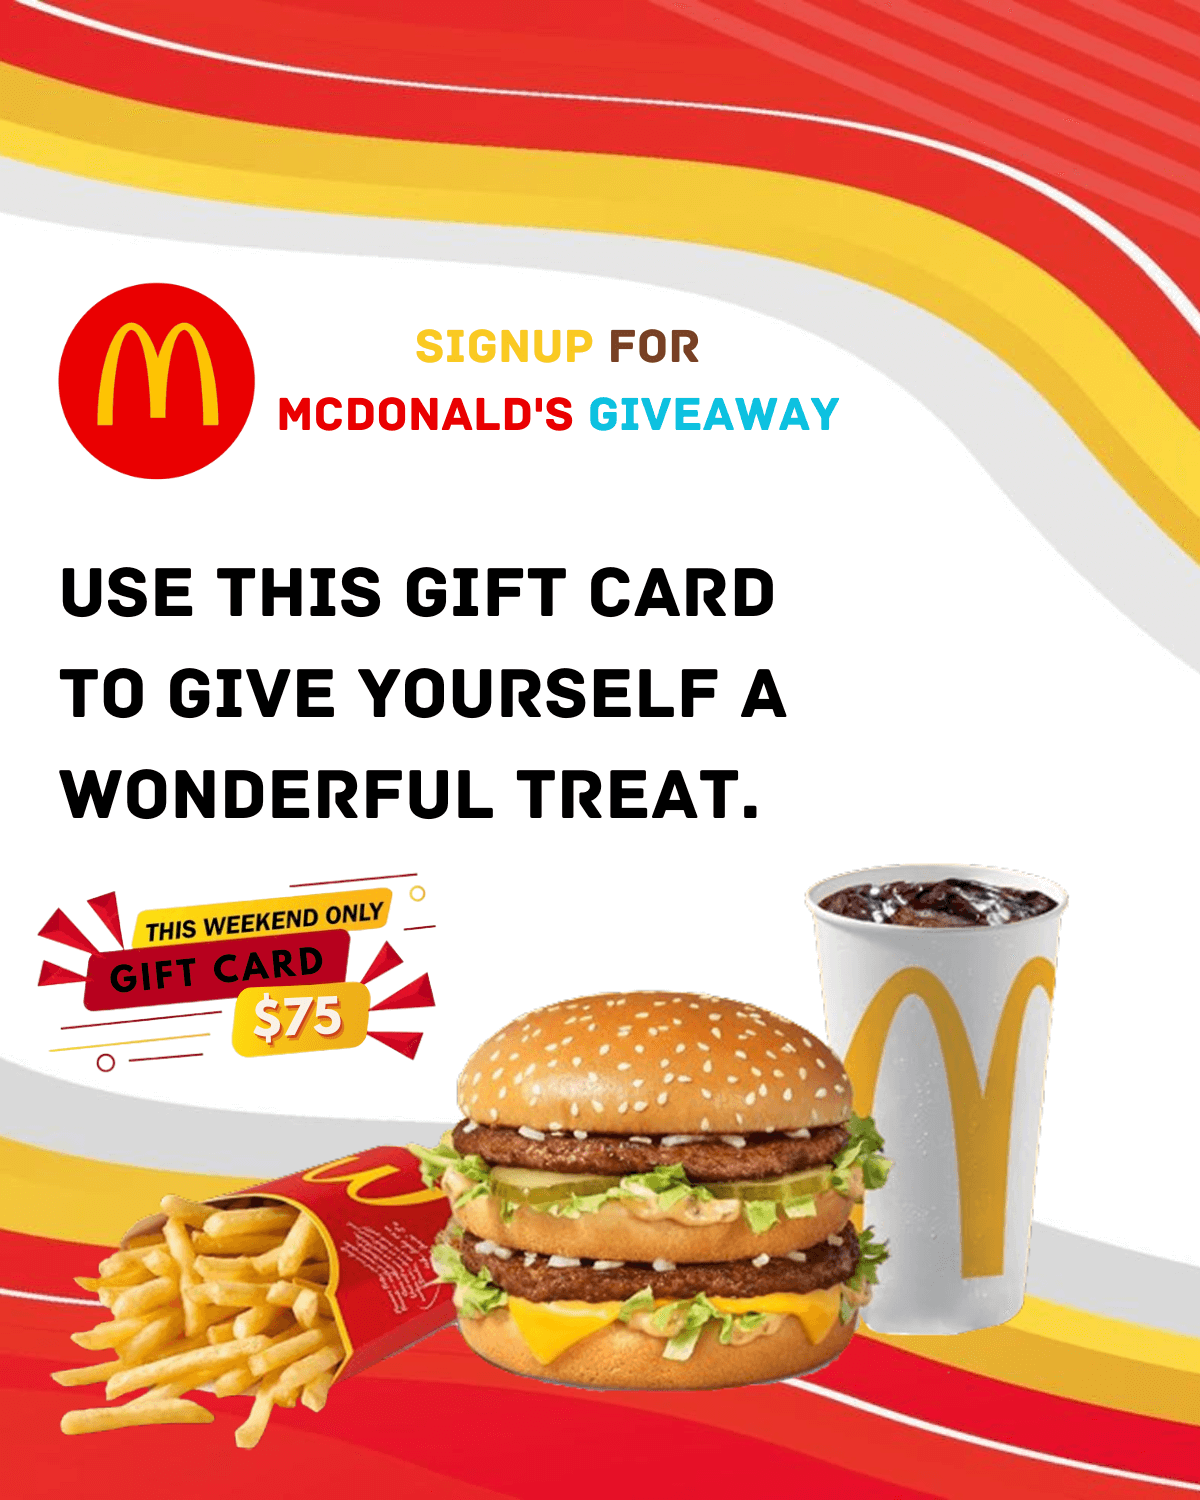 Use this gift card to give yourself a wonderful treat.